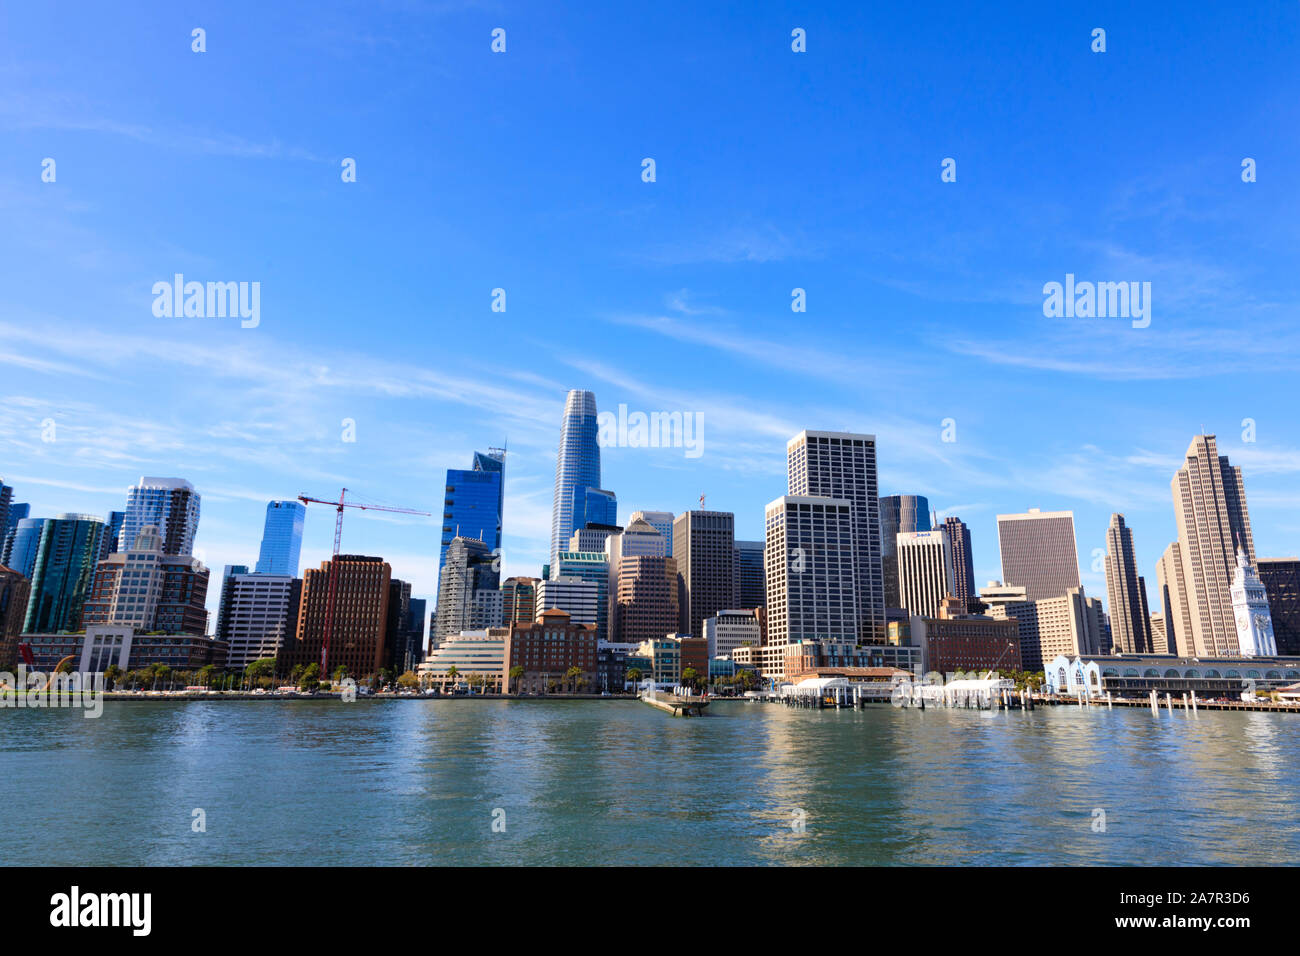 San Francisco skyline with skyscrapers, California, United States of America Stock Photo